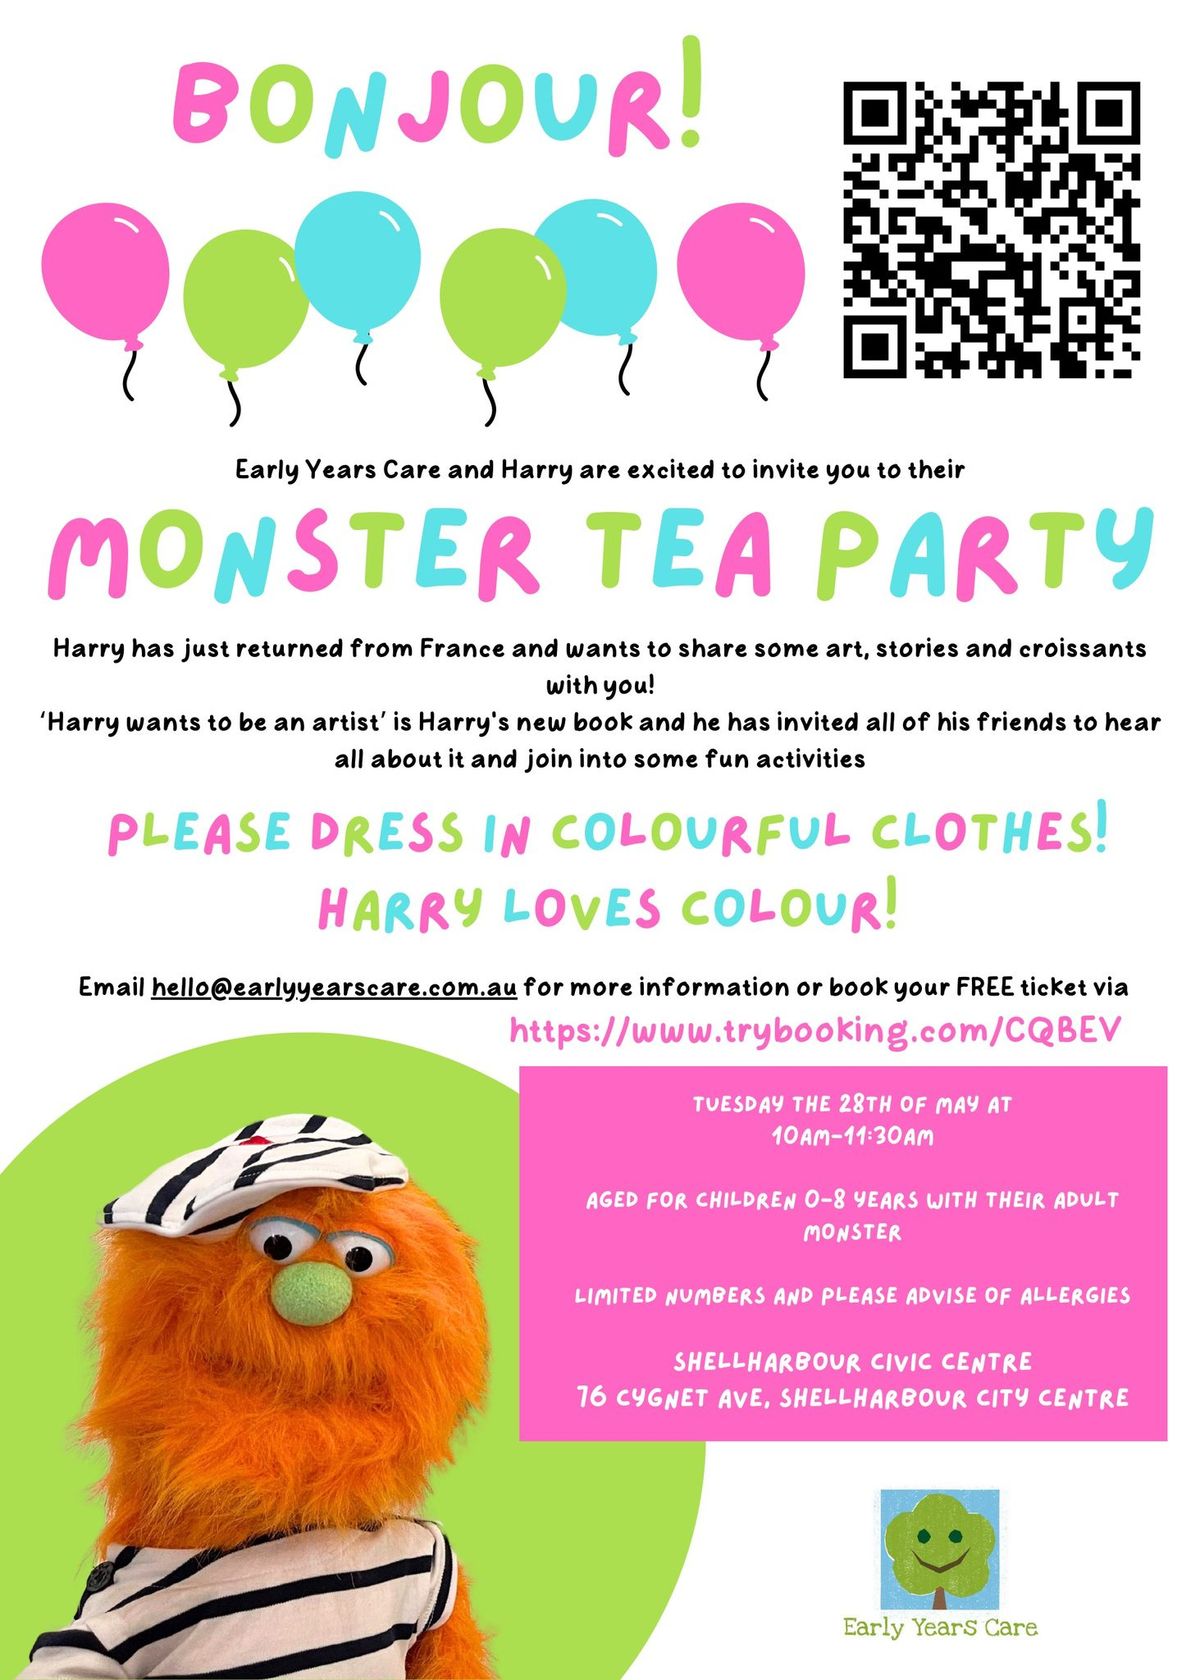 Harry's monster and art party!